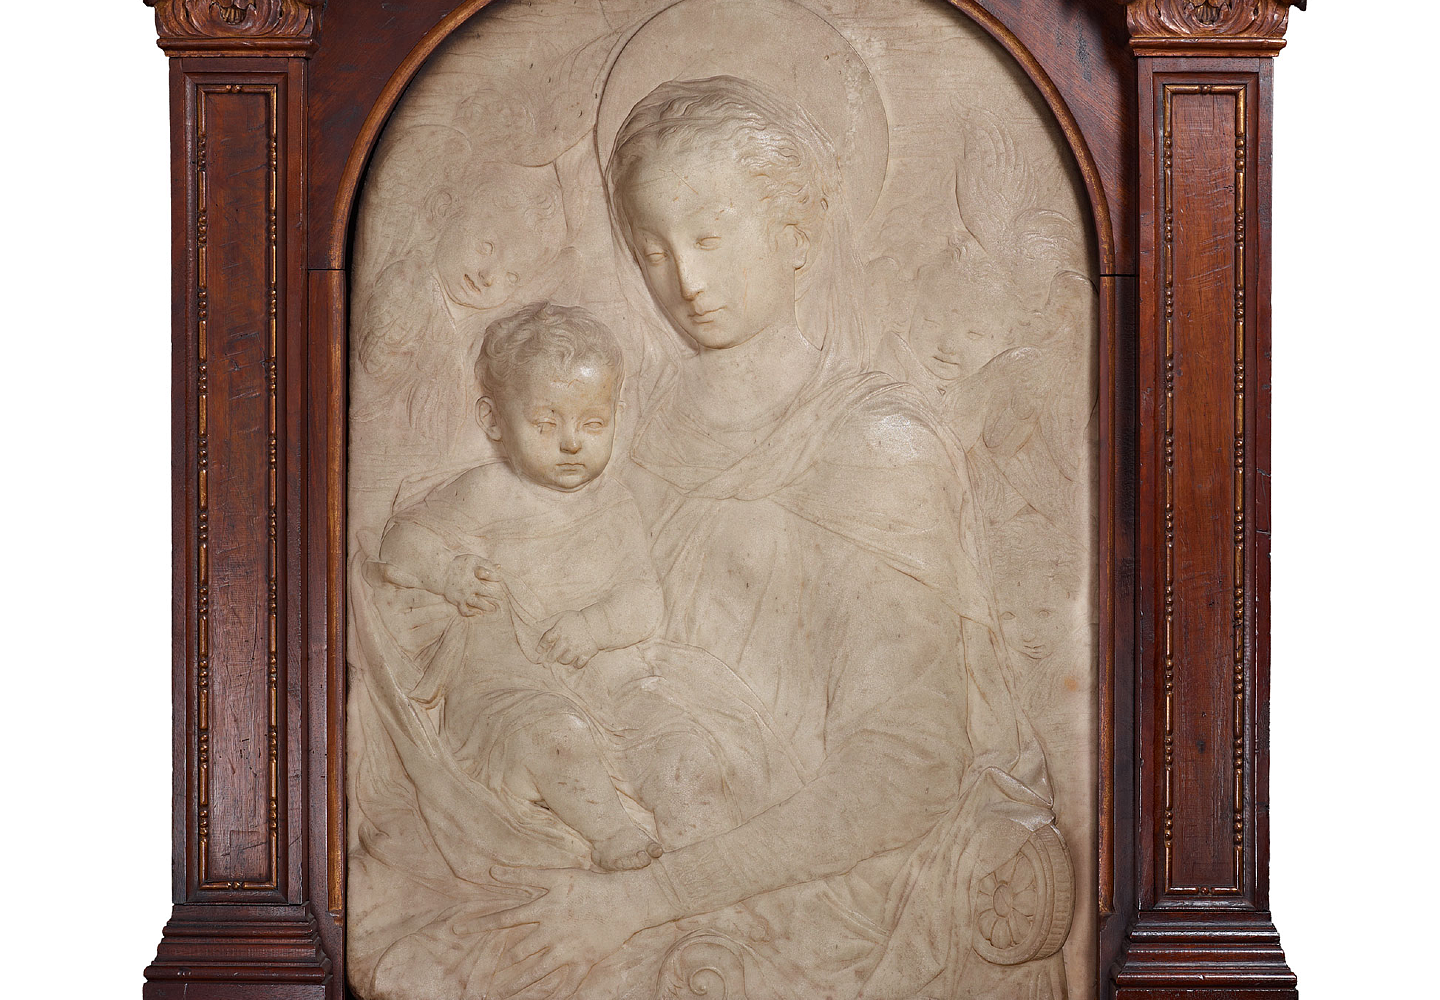 Rossellino’s “Virgin and Child” Relief: An Interactive Spotlight Tour